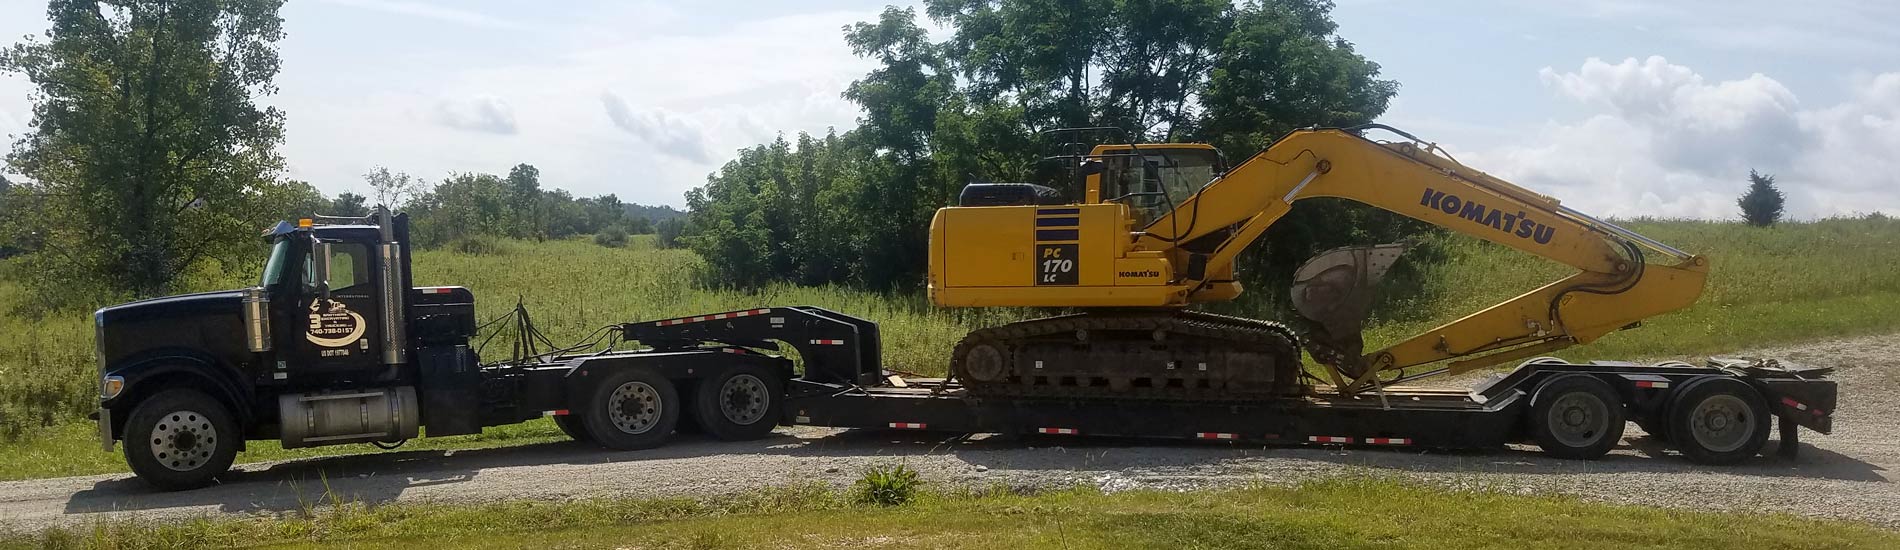 Large excavator on a flat bed trailer